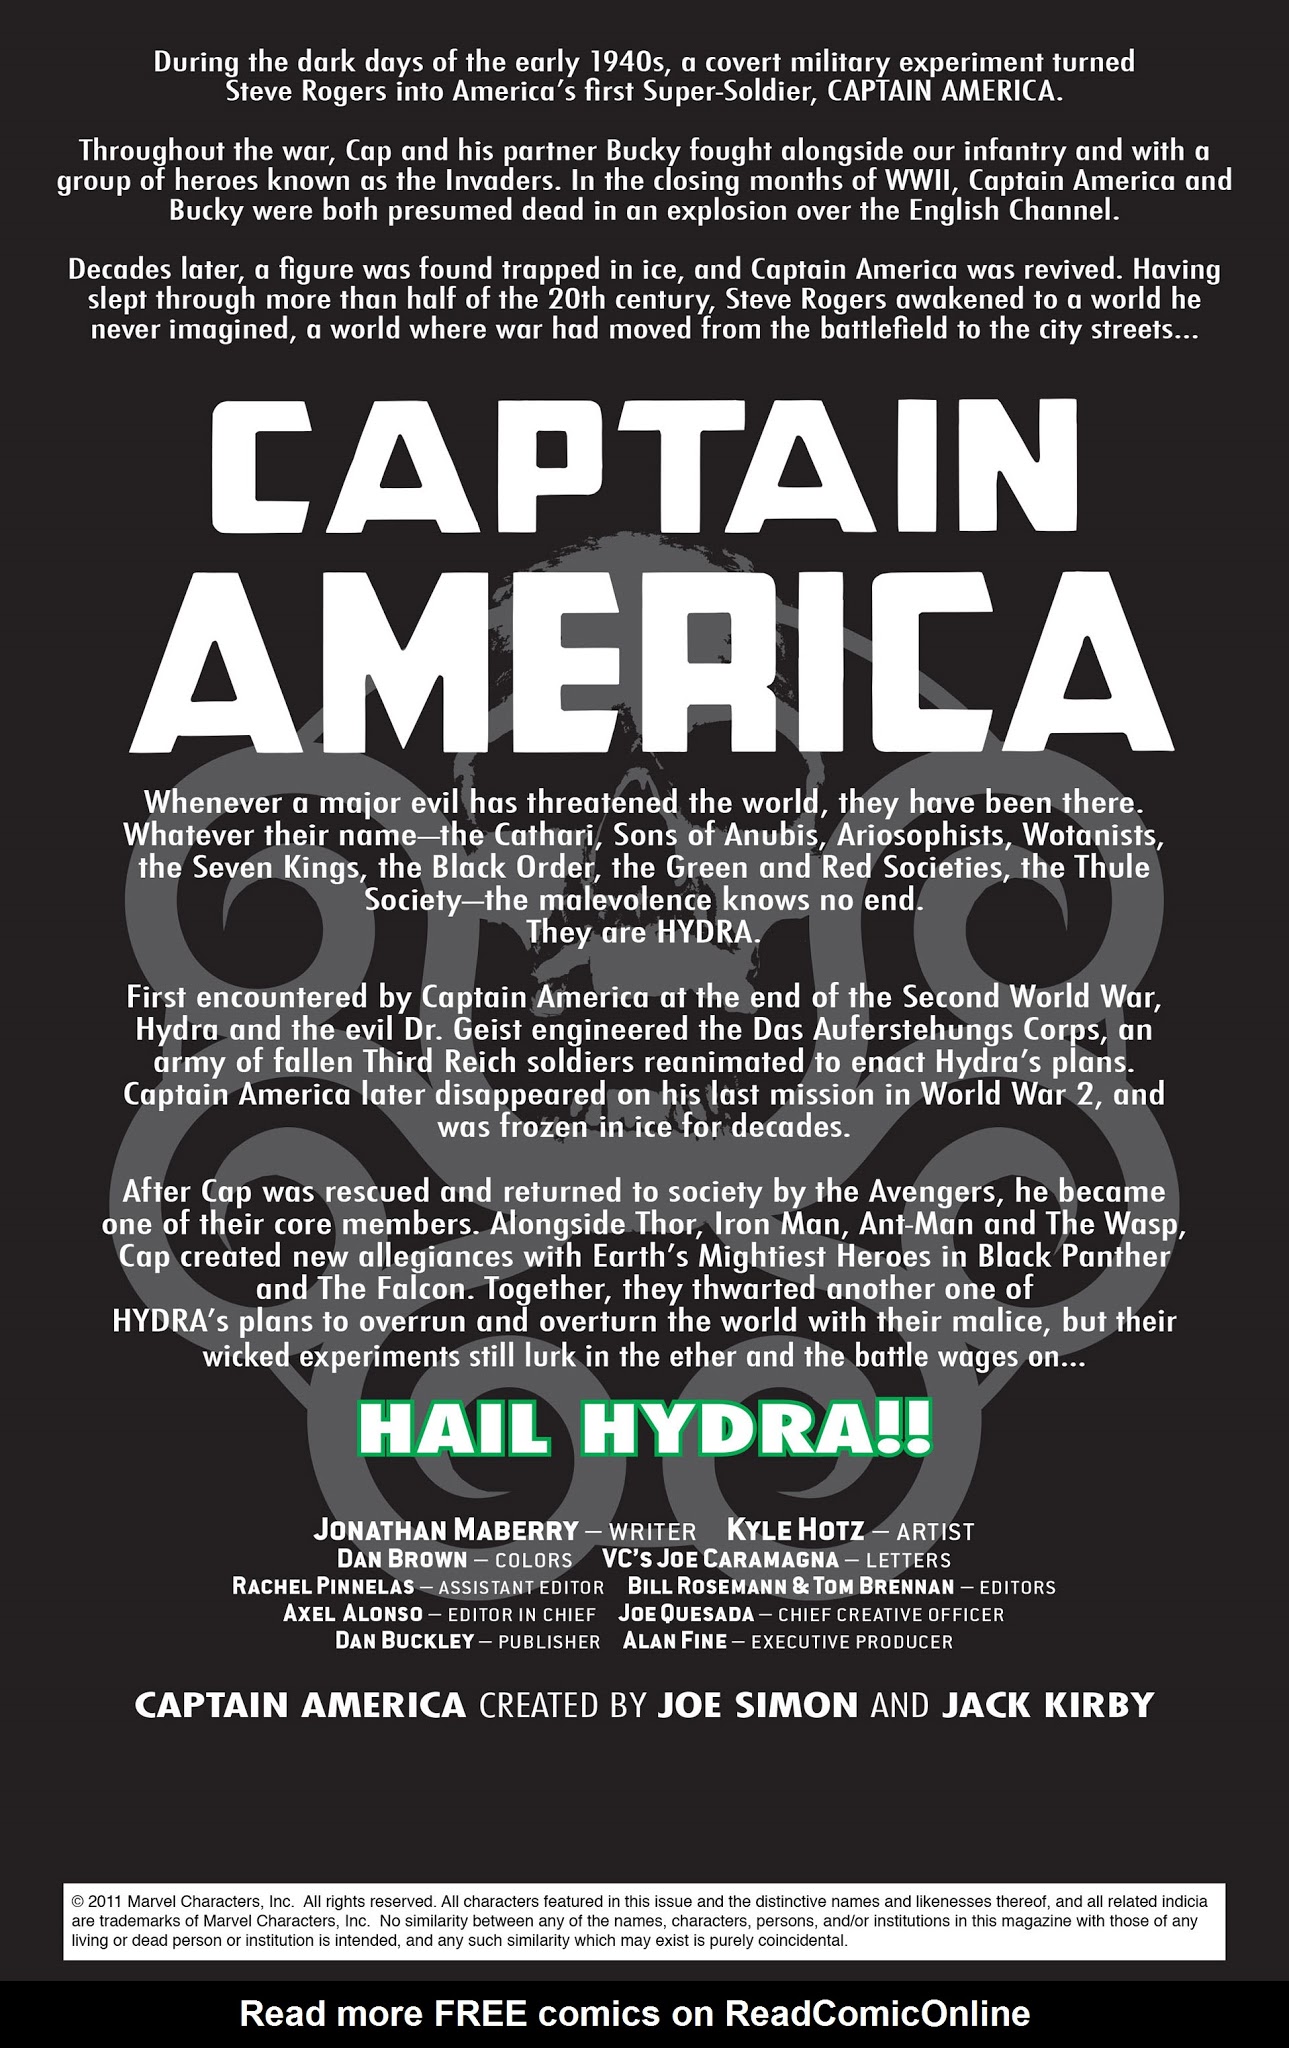 Read online Captain America: Hail Hydra comic -  Issue #4 - 2